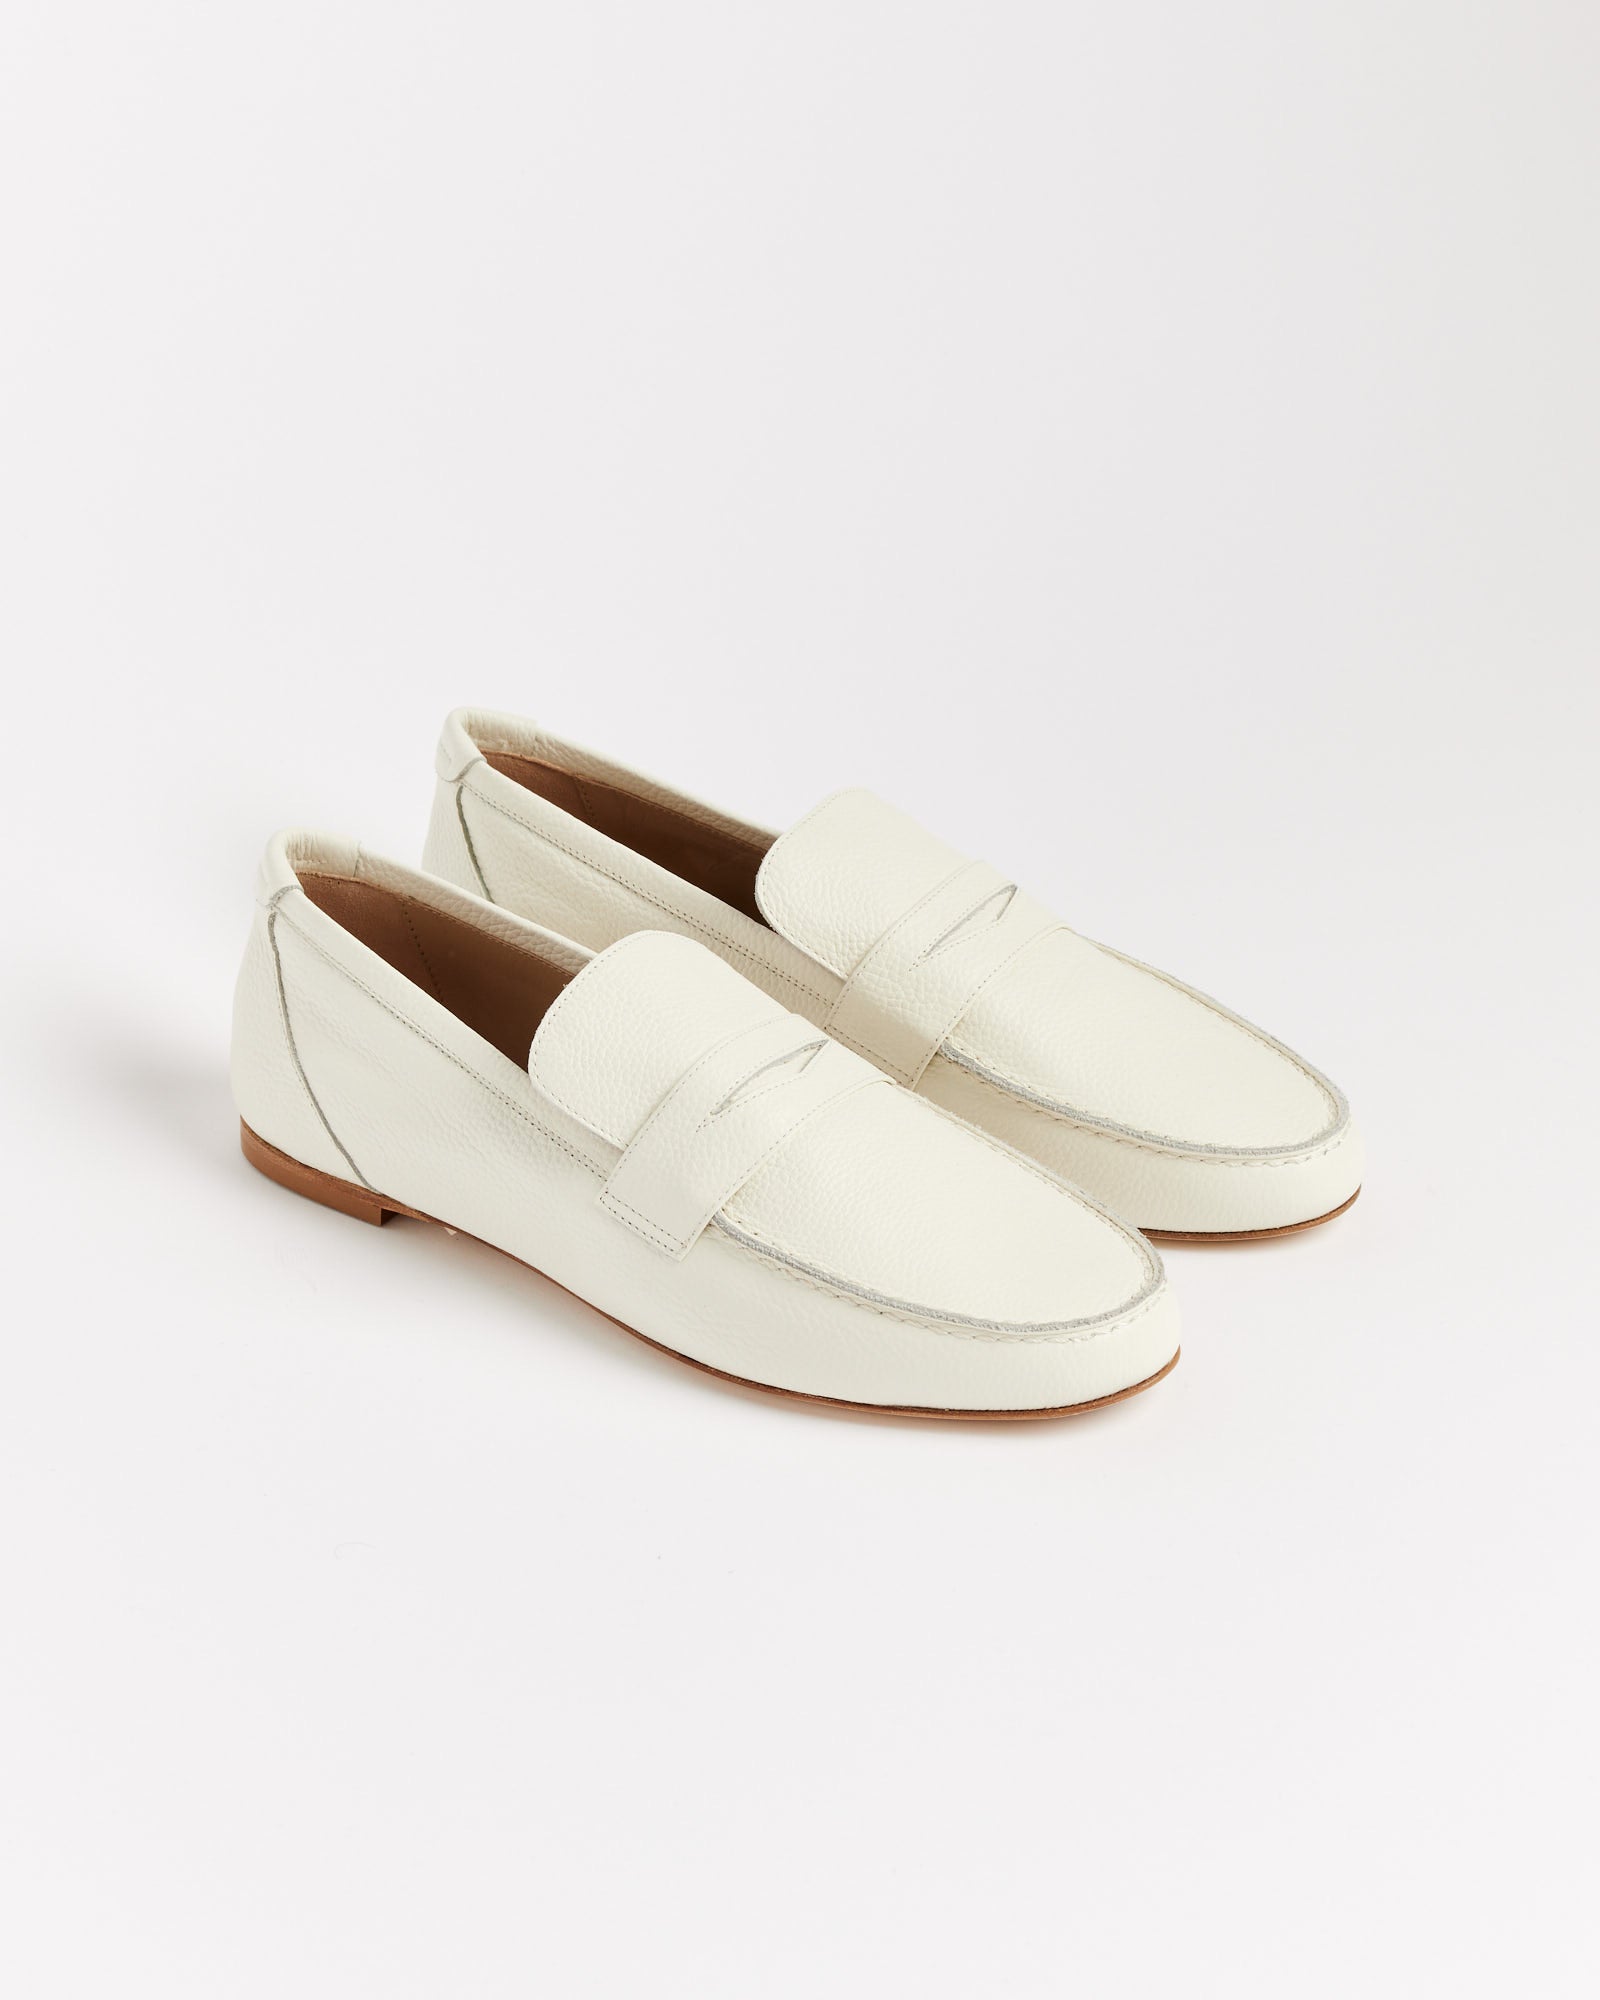 Penny Loafers in Pebble White